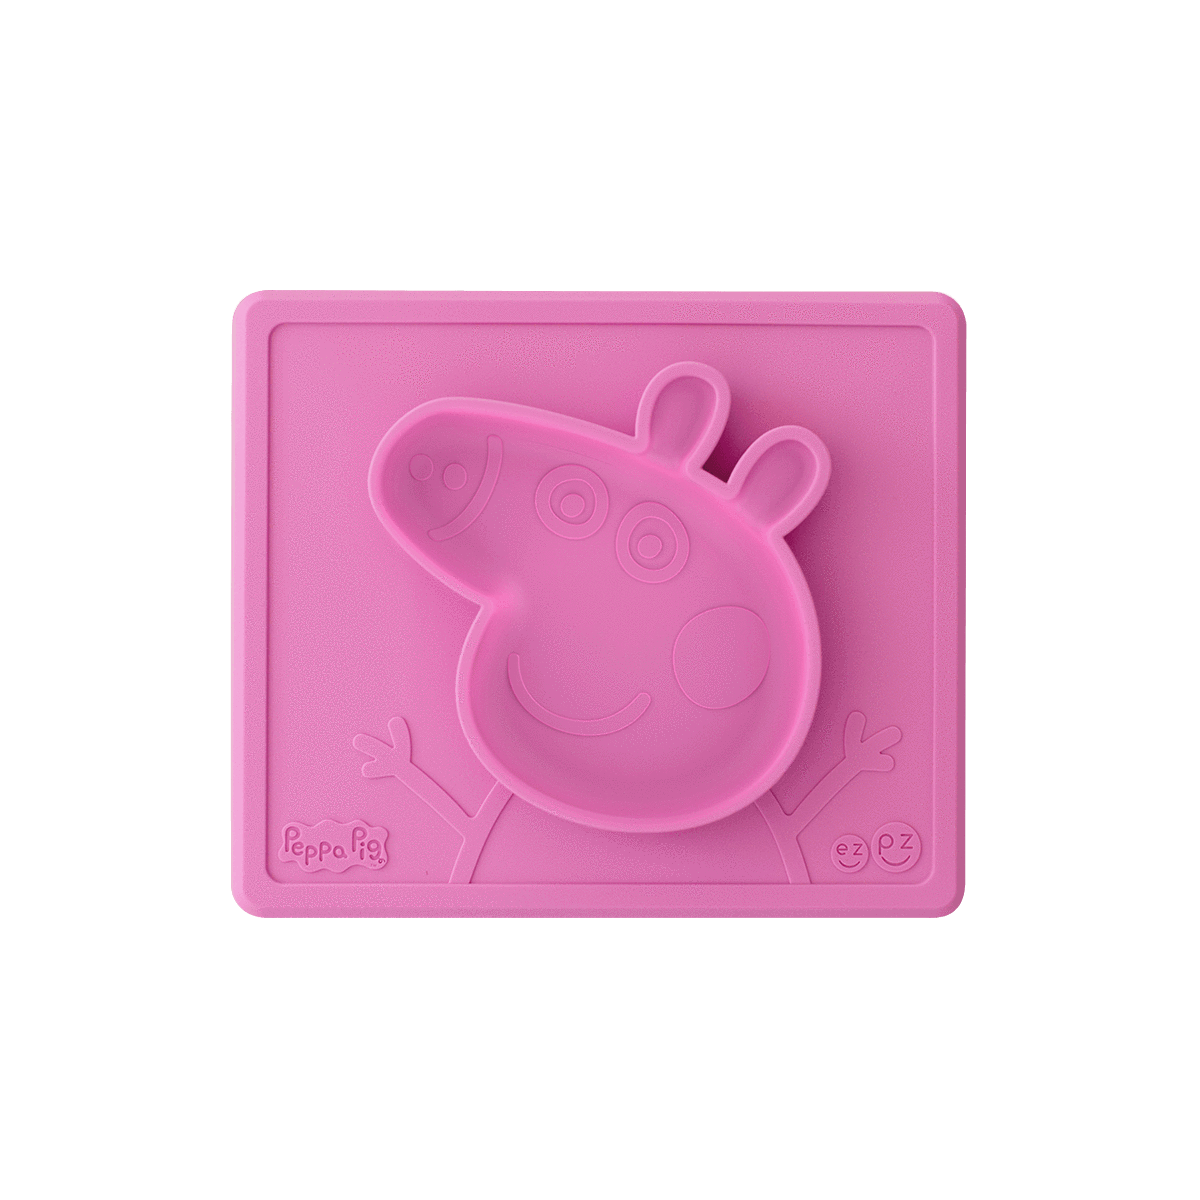 Peppa-Pig-Product-Template-main_1296x1296